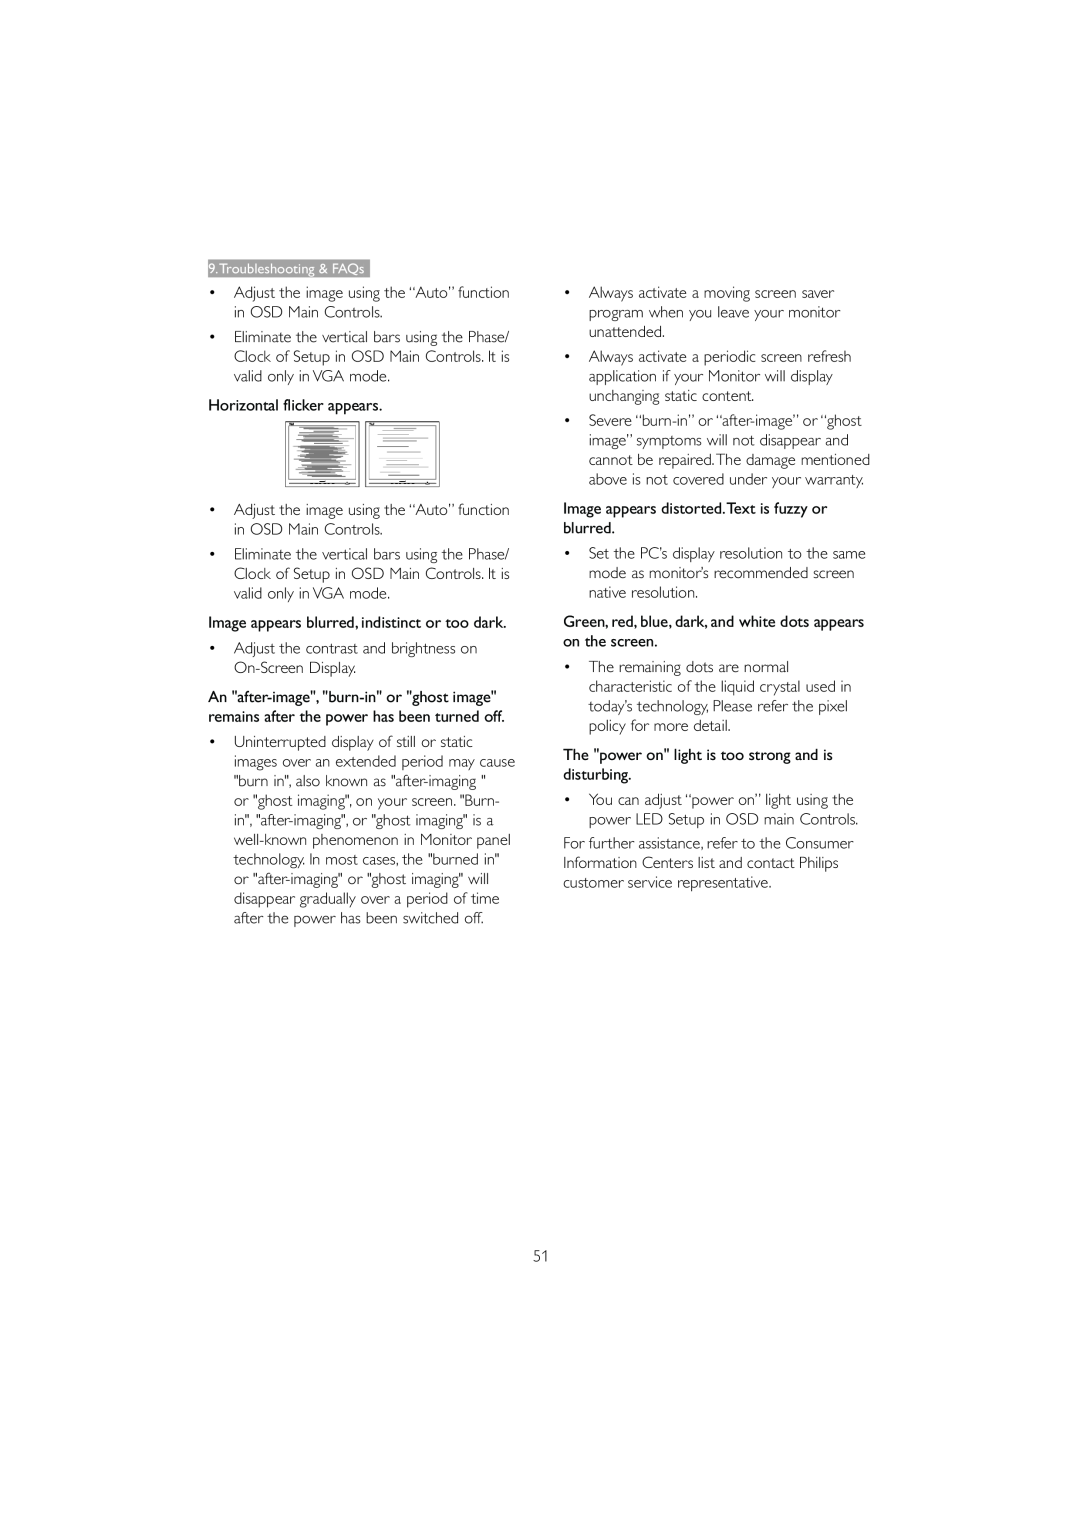 Philips 221B3 user manual v Adjust the contrast and brightness on On-Screen Display 